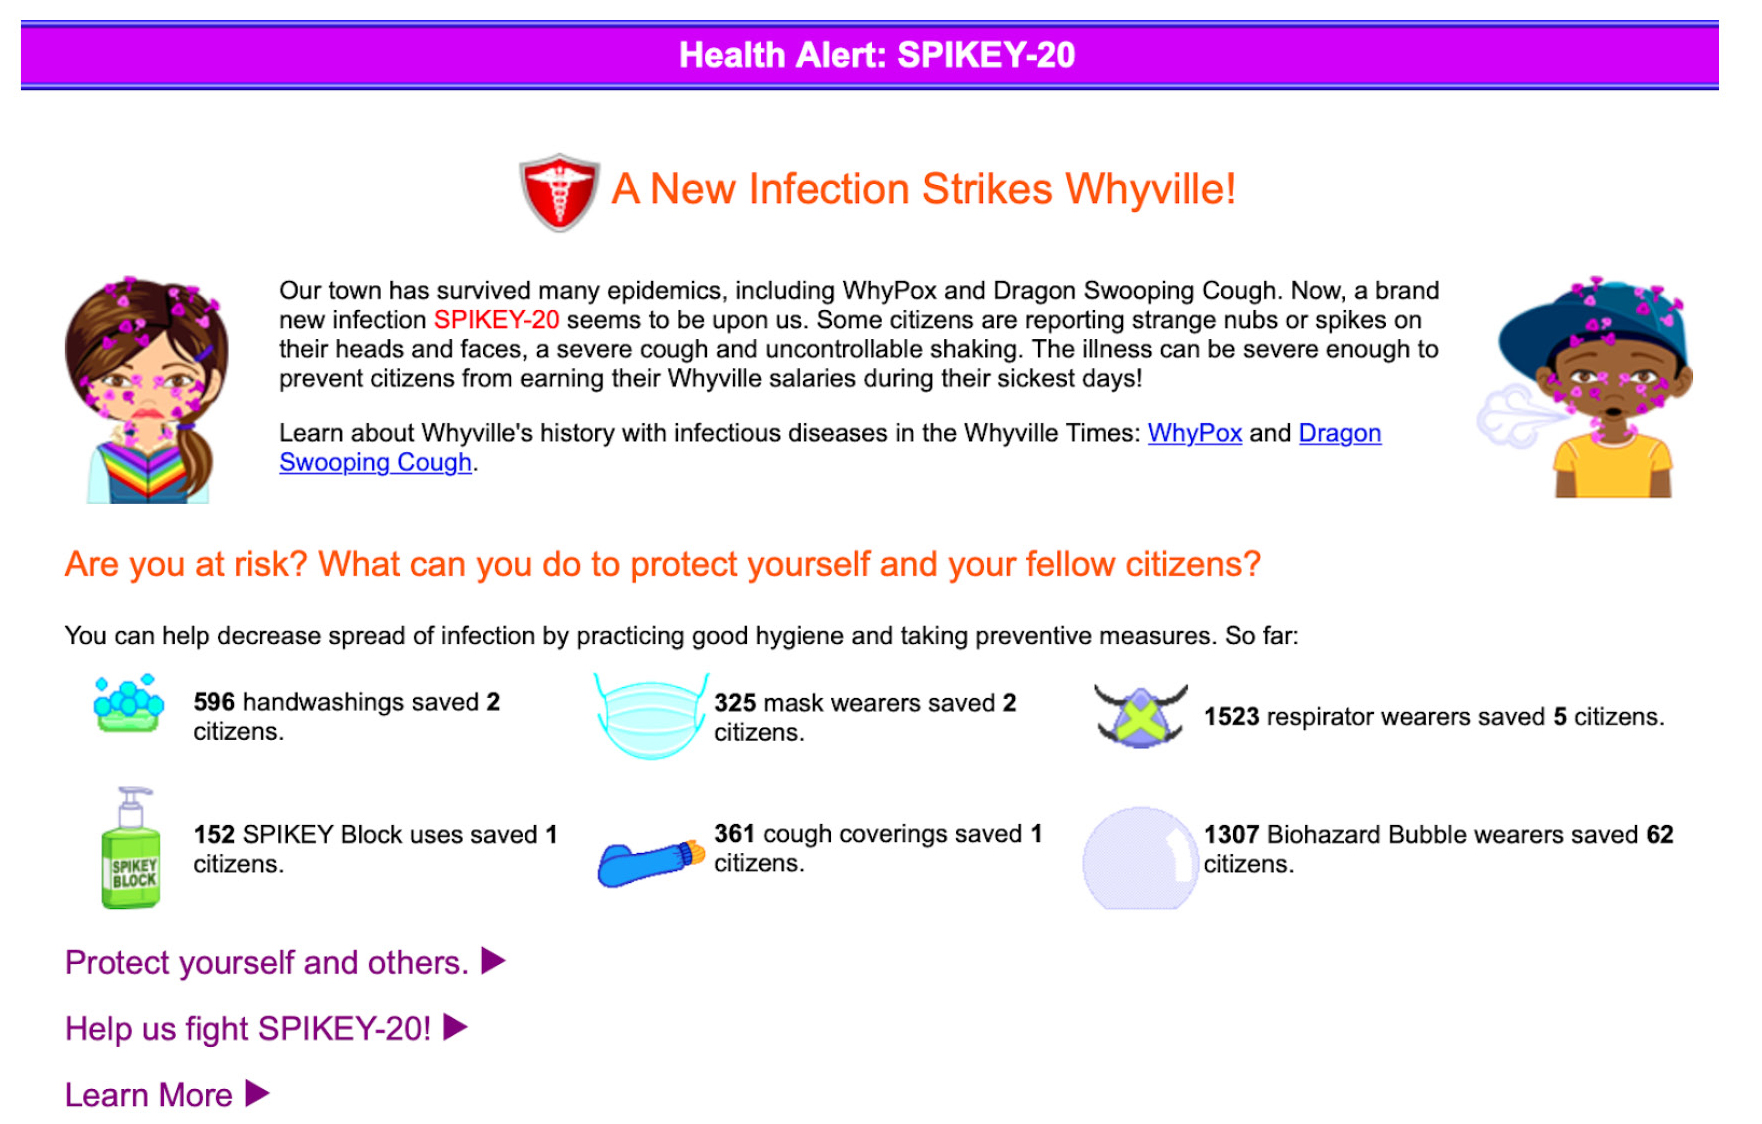 Figure 2 Whyville virus alert and list of precautions to take.